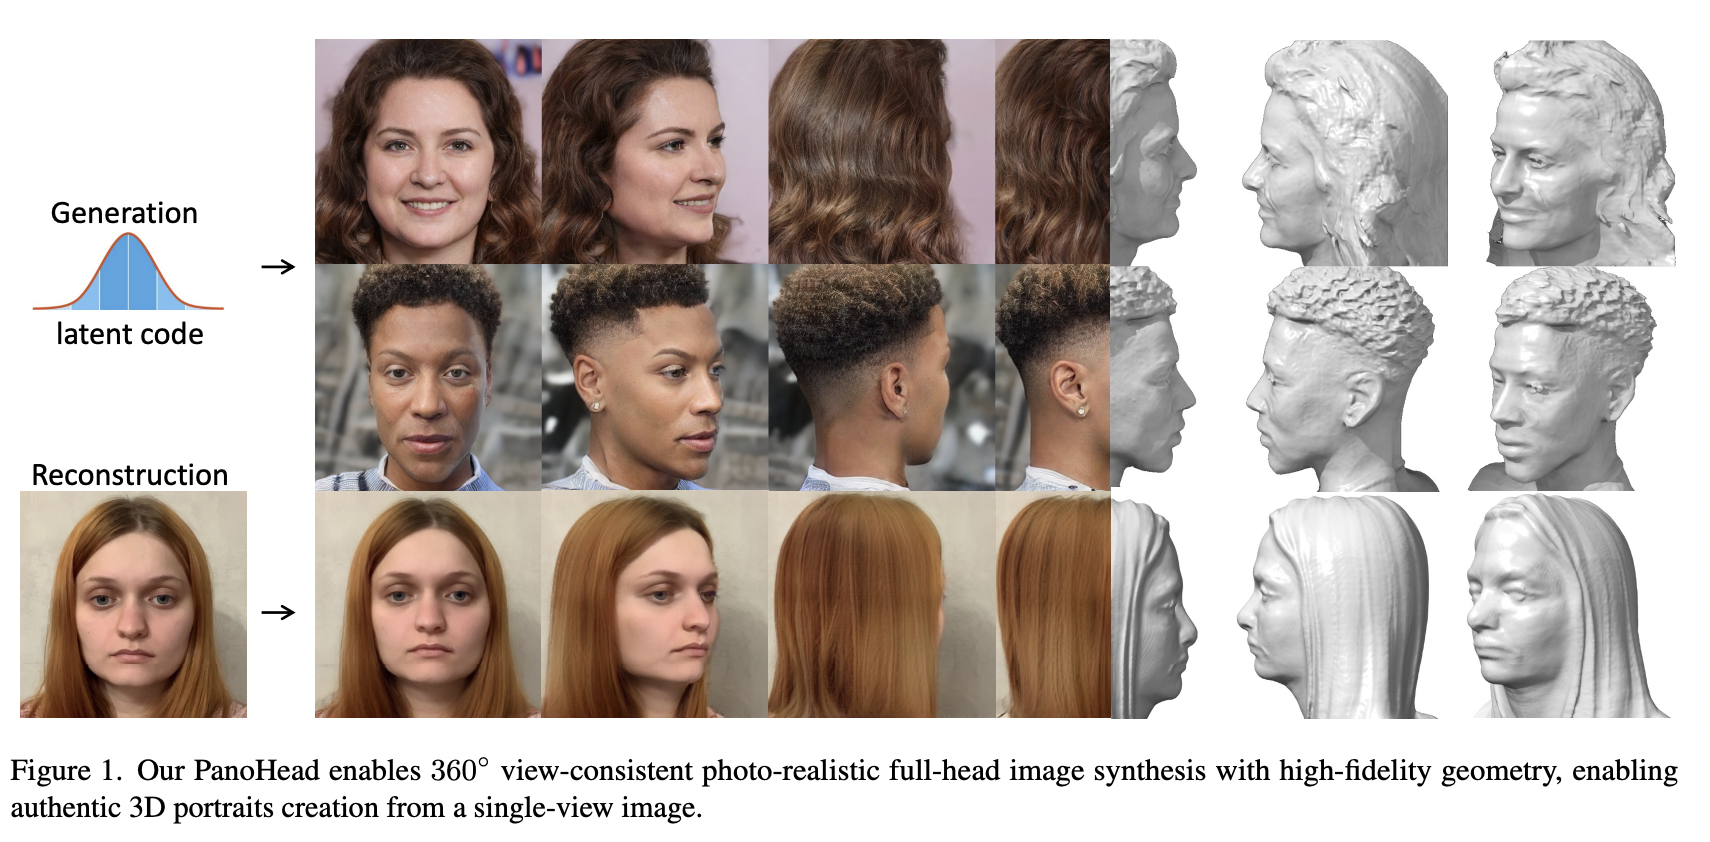 Researchers from the University of Wisconsin and ByteDance Introduce PanoHead: The First 3D GAN Framework that Synthesizes View-Consistent Full Head Images with only Single-View Images